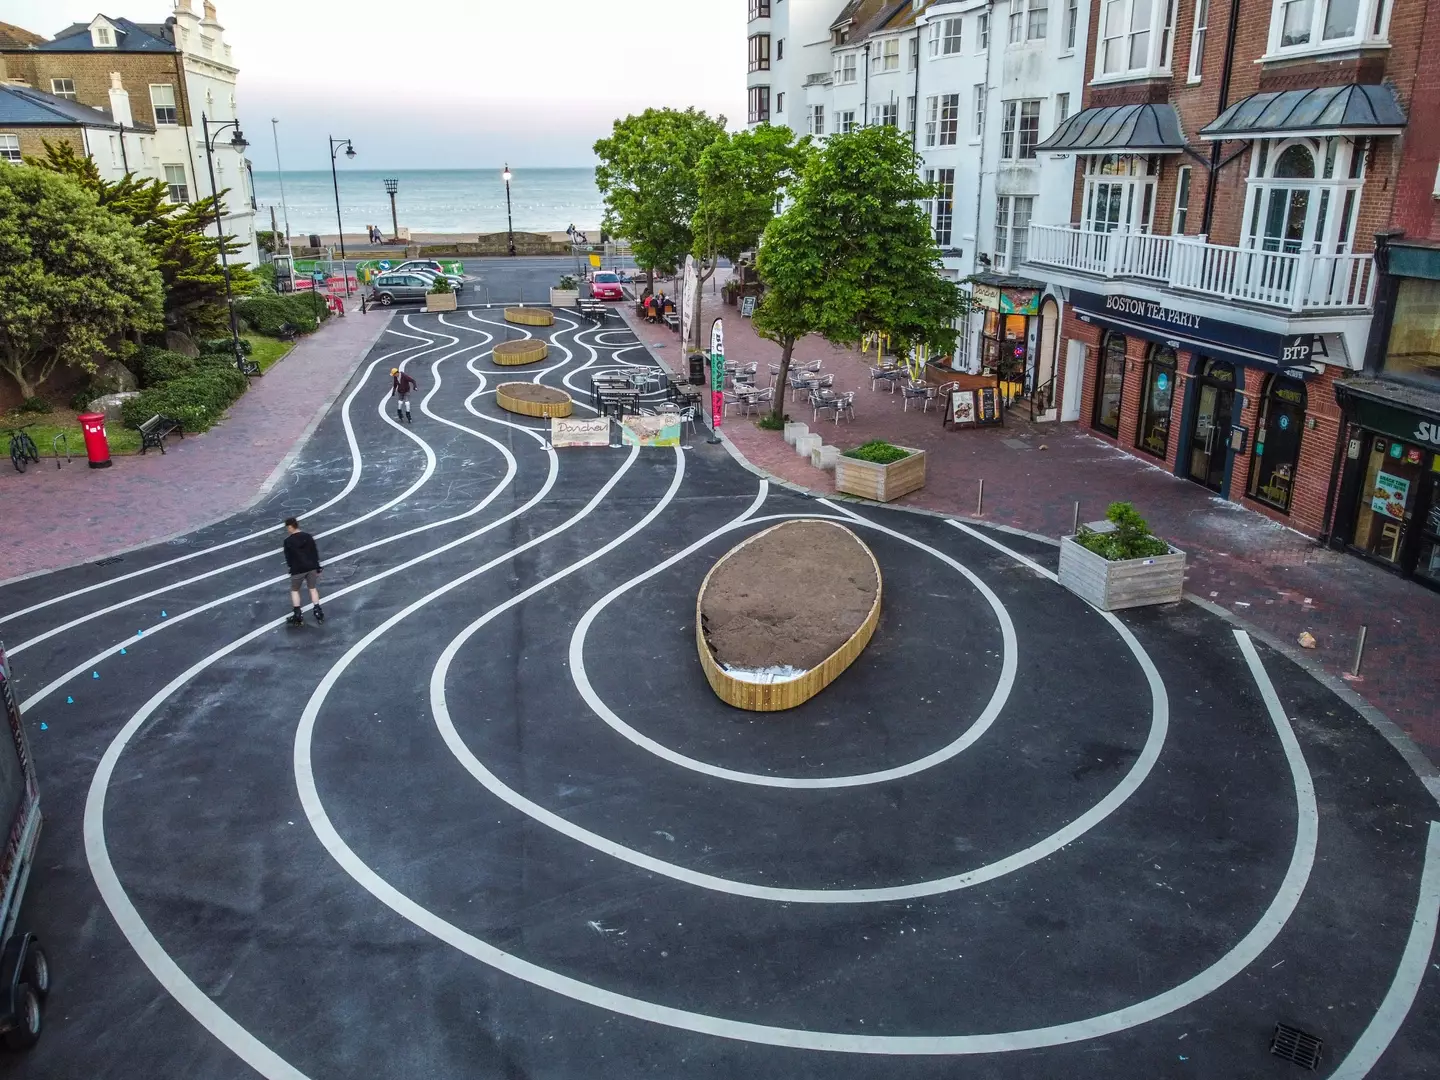 The wiggly lines are a small part of a £178,000 renovation of Worthing town centre.